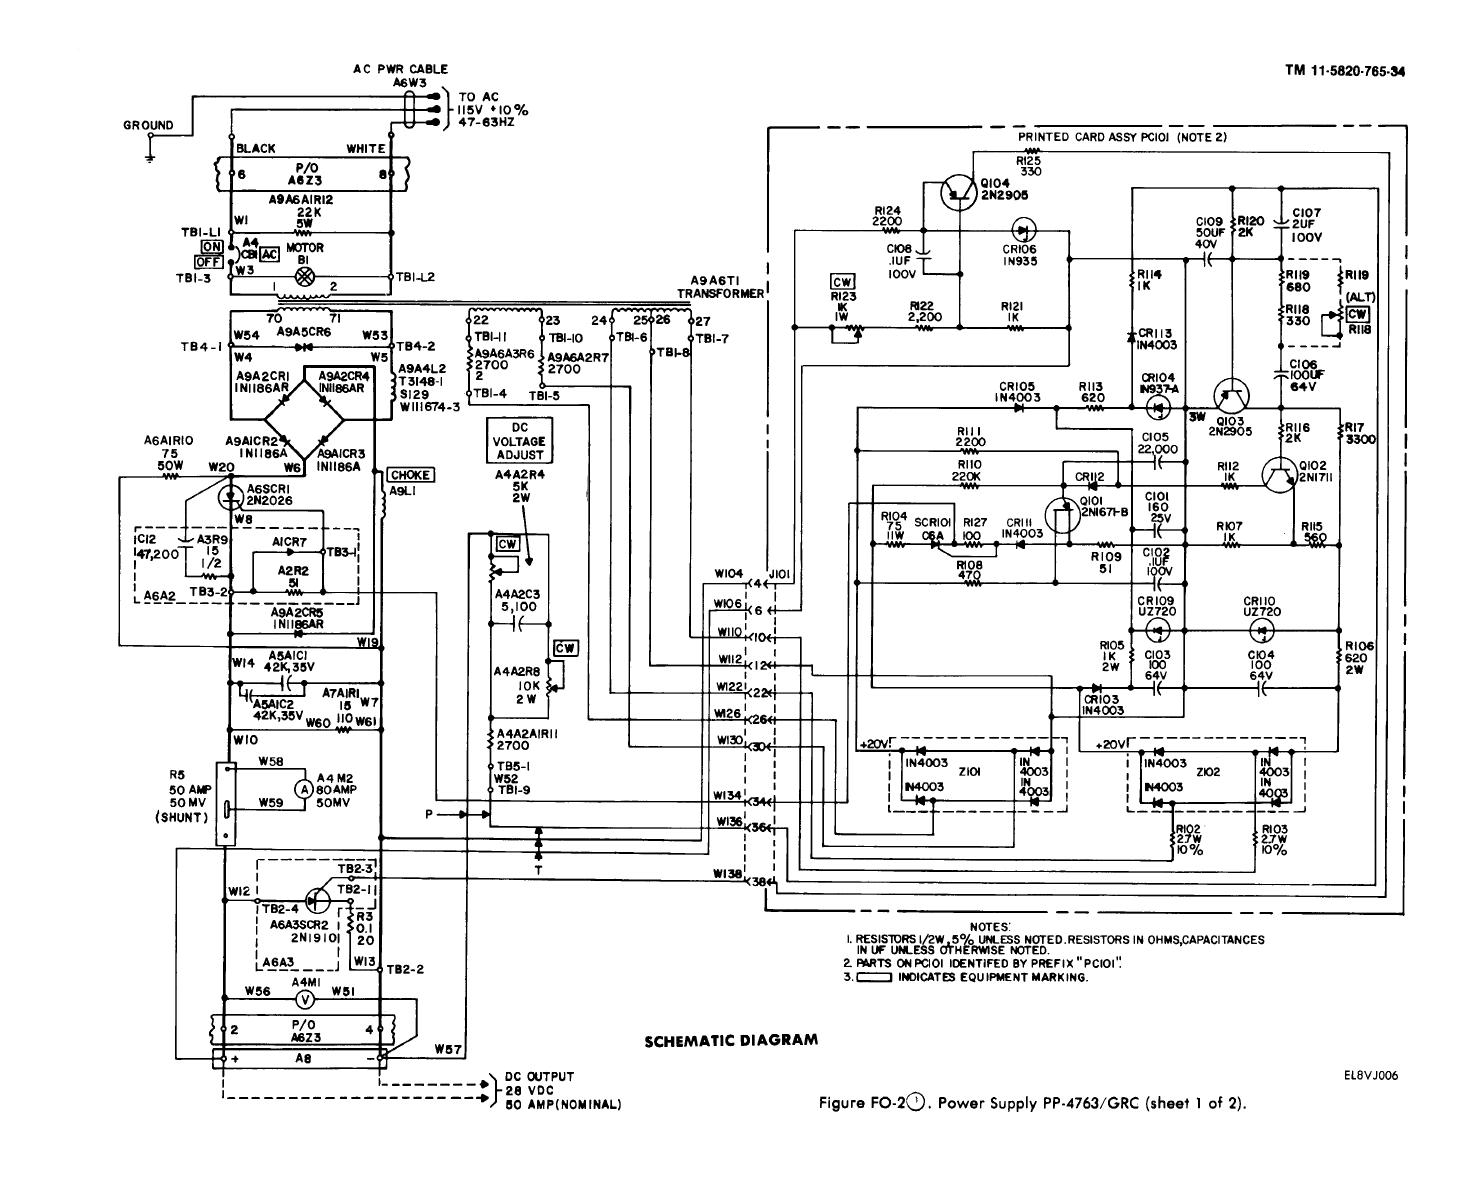 Figure FO-2. Power Supply PP-4763/GRC (Sheet 1 of 2)